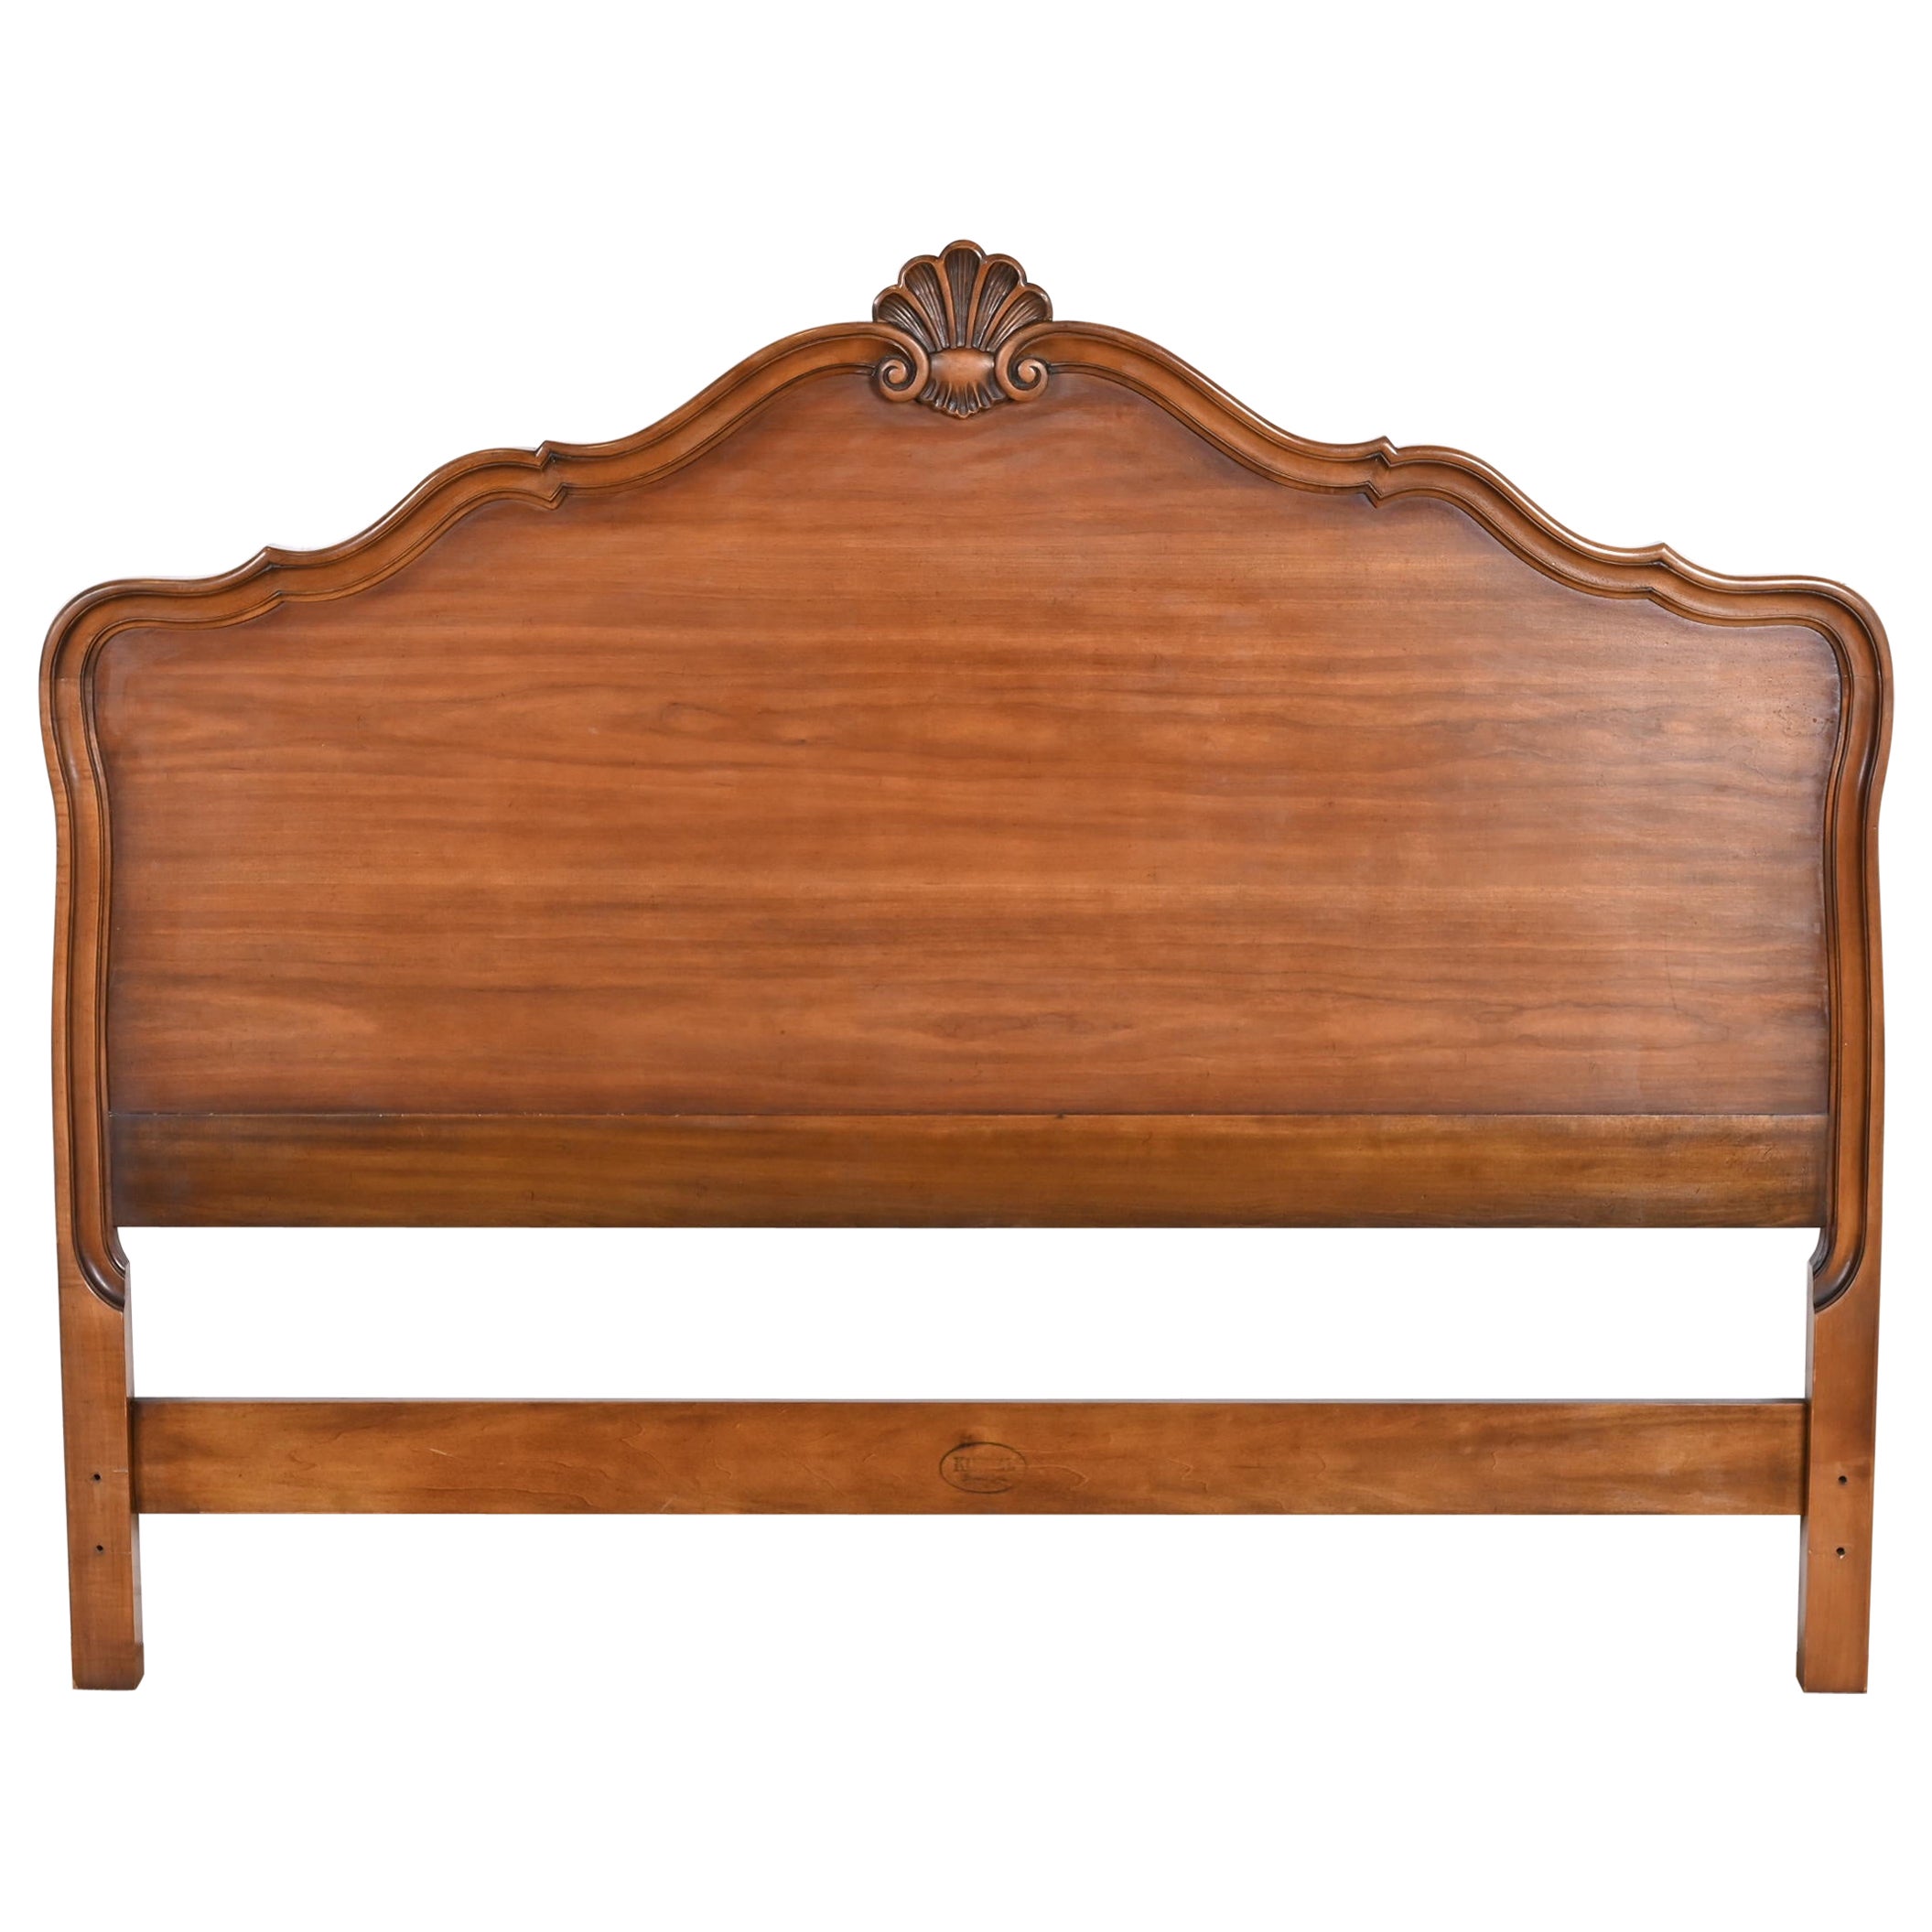 Kindel Furniture French Provincial Louis XV Cherry Wood Queen Size Headboard